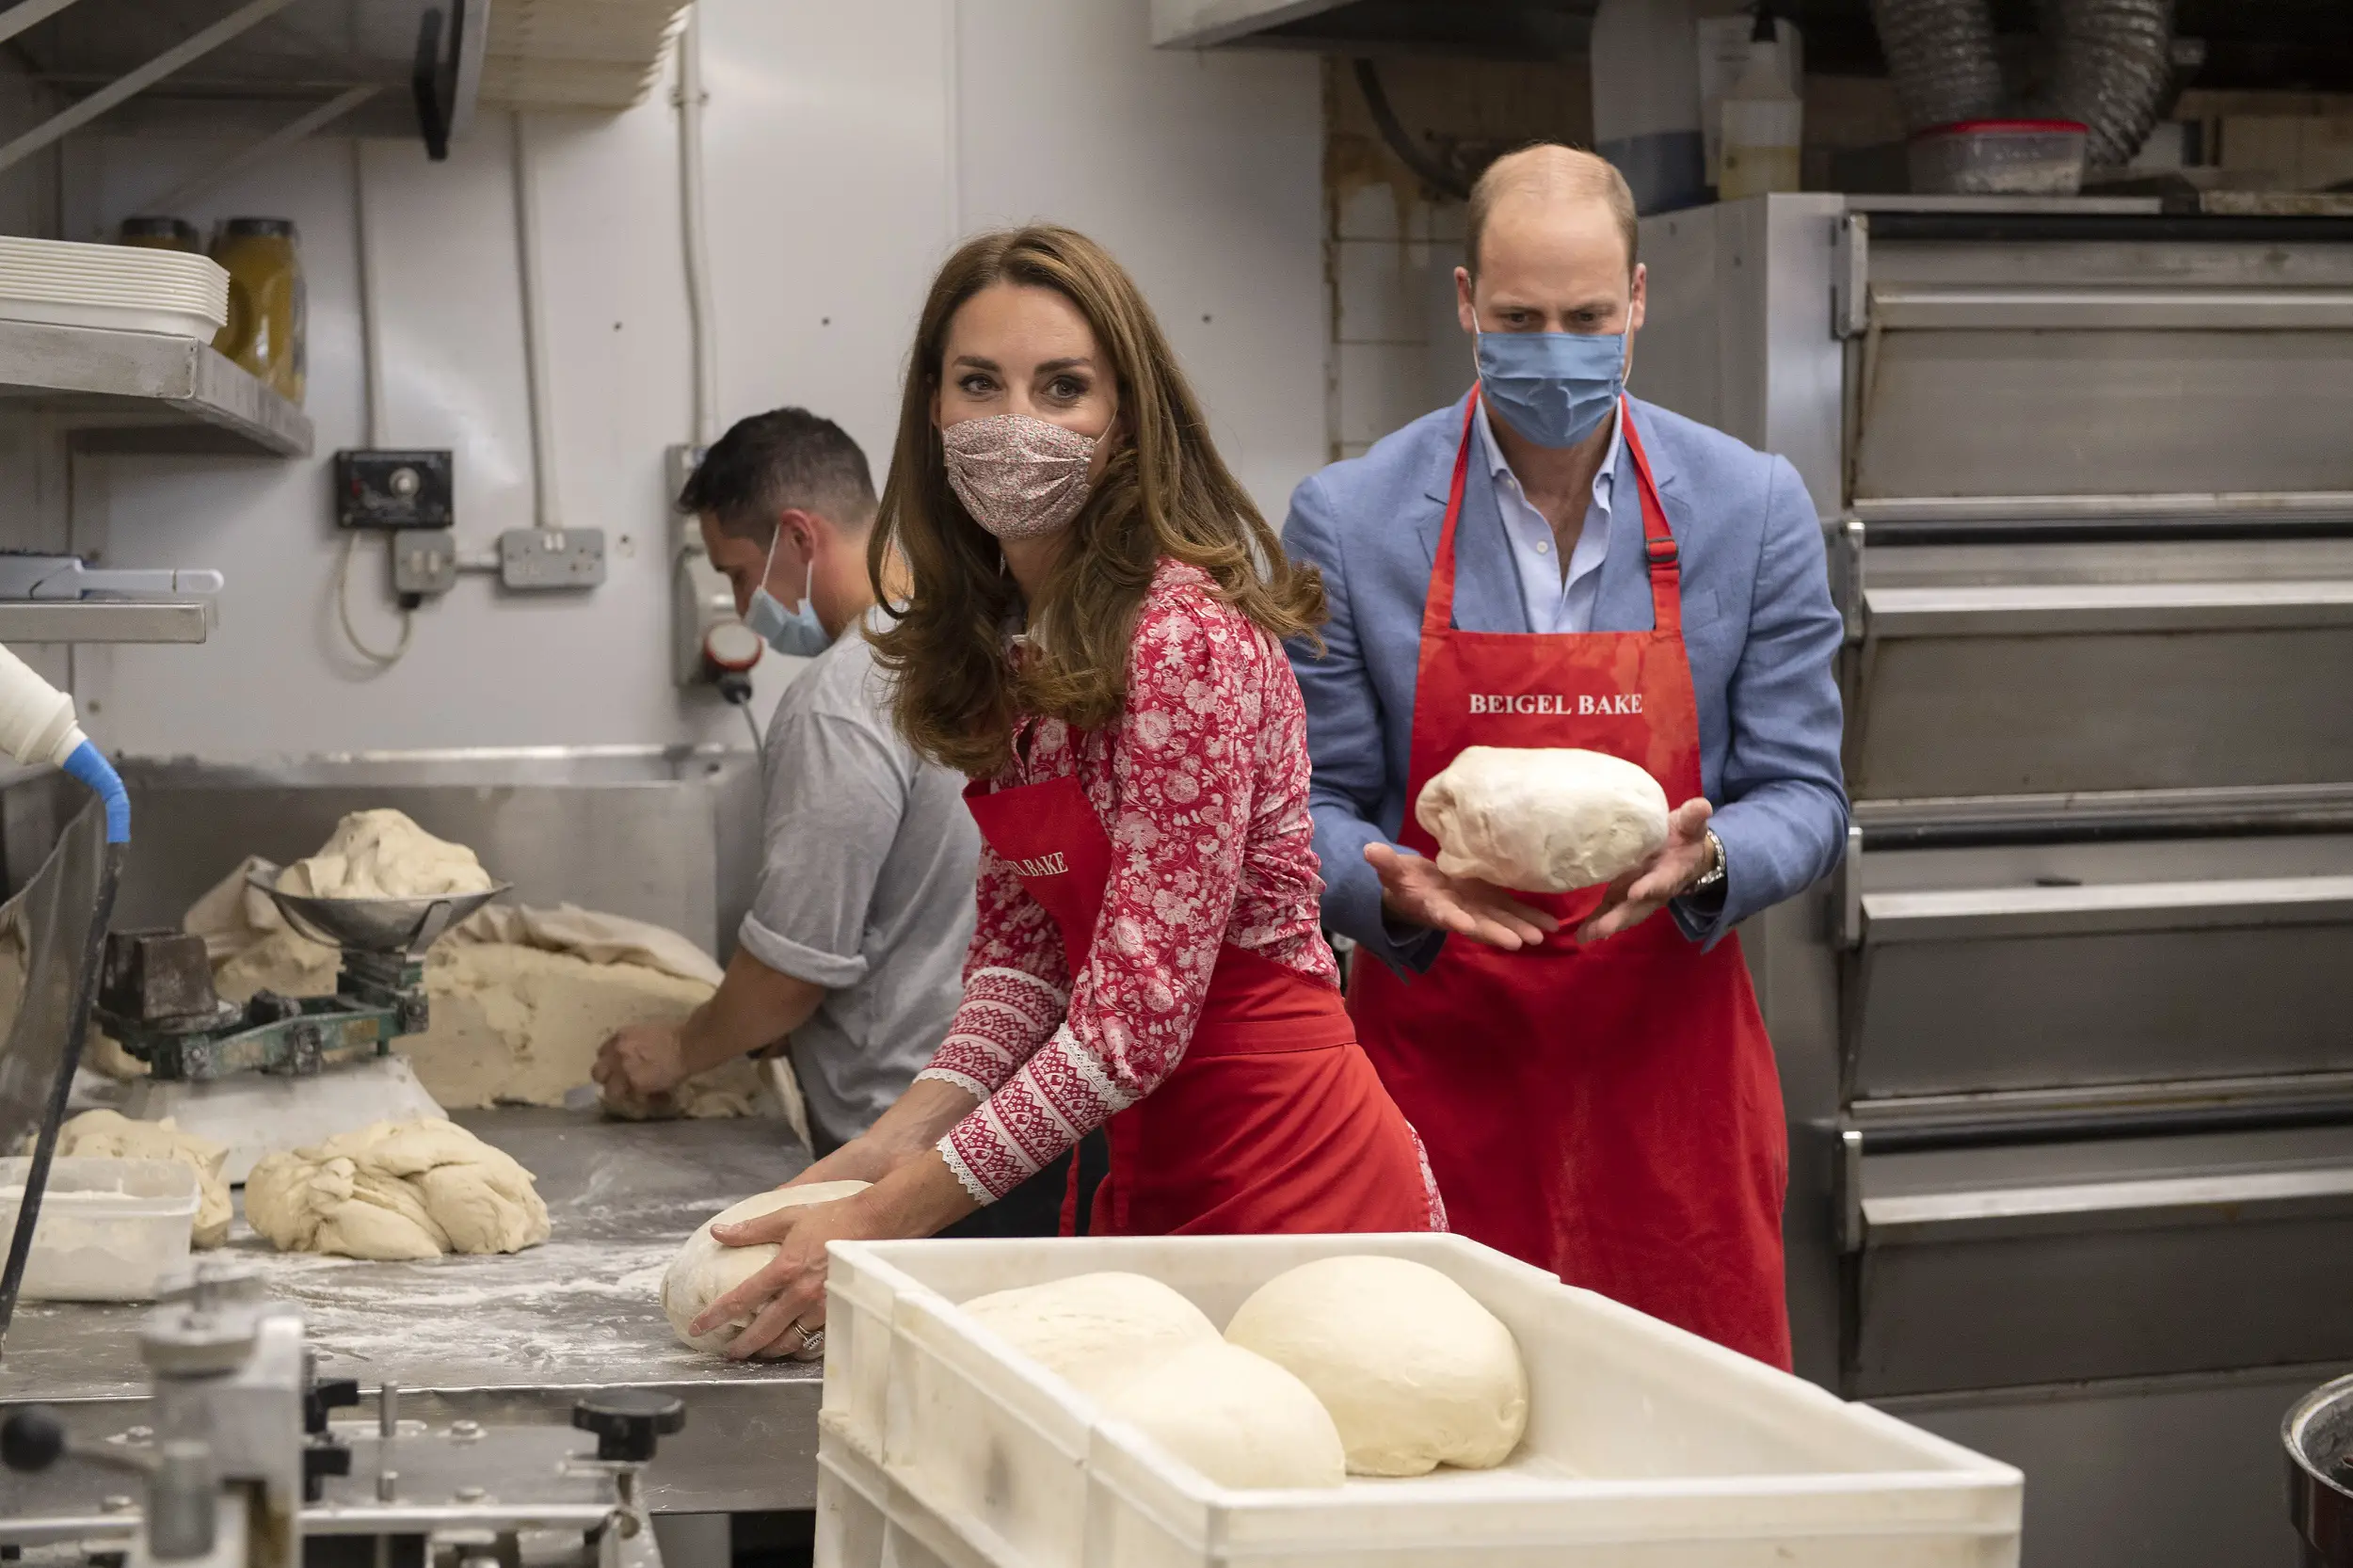 The Duchess of Cambridge made beigels at the famous bakery shop in london